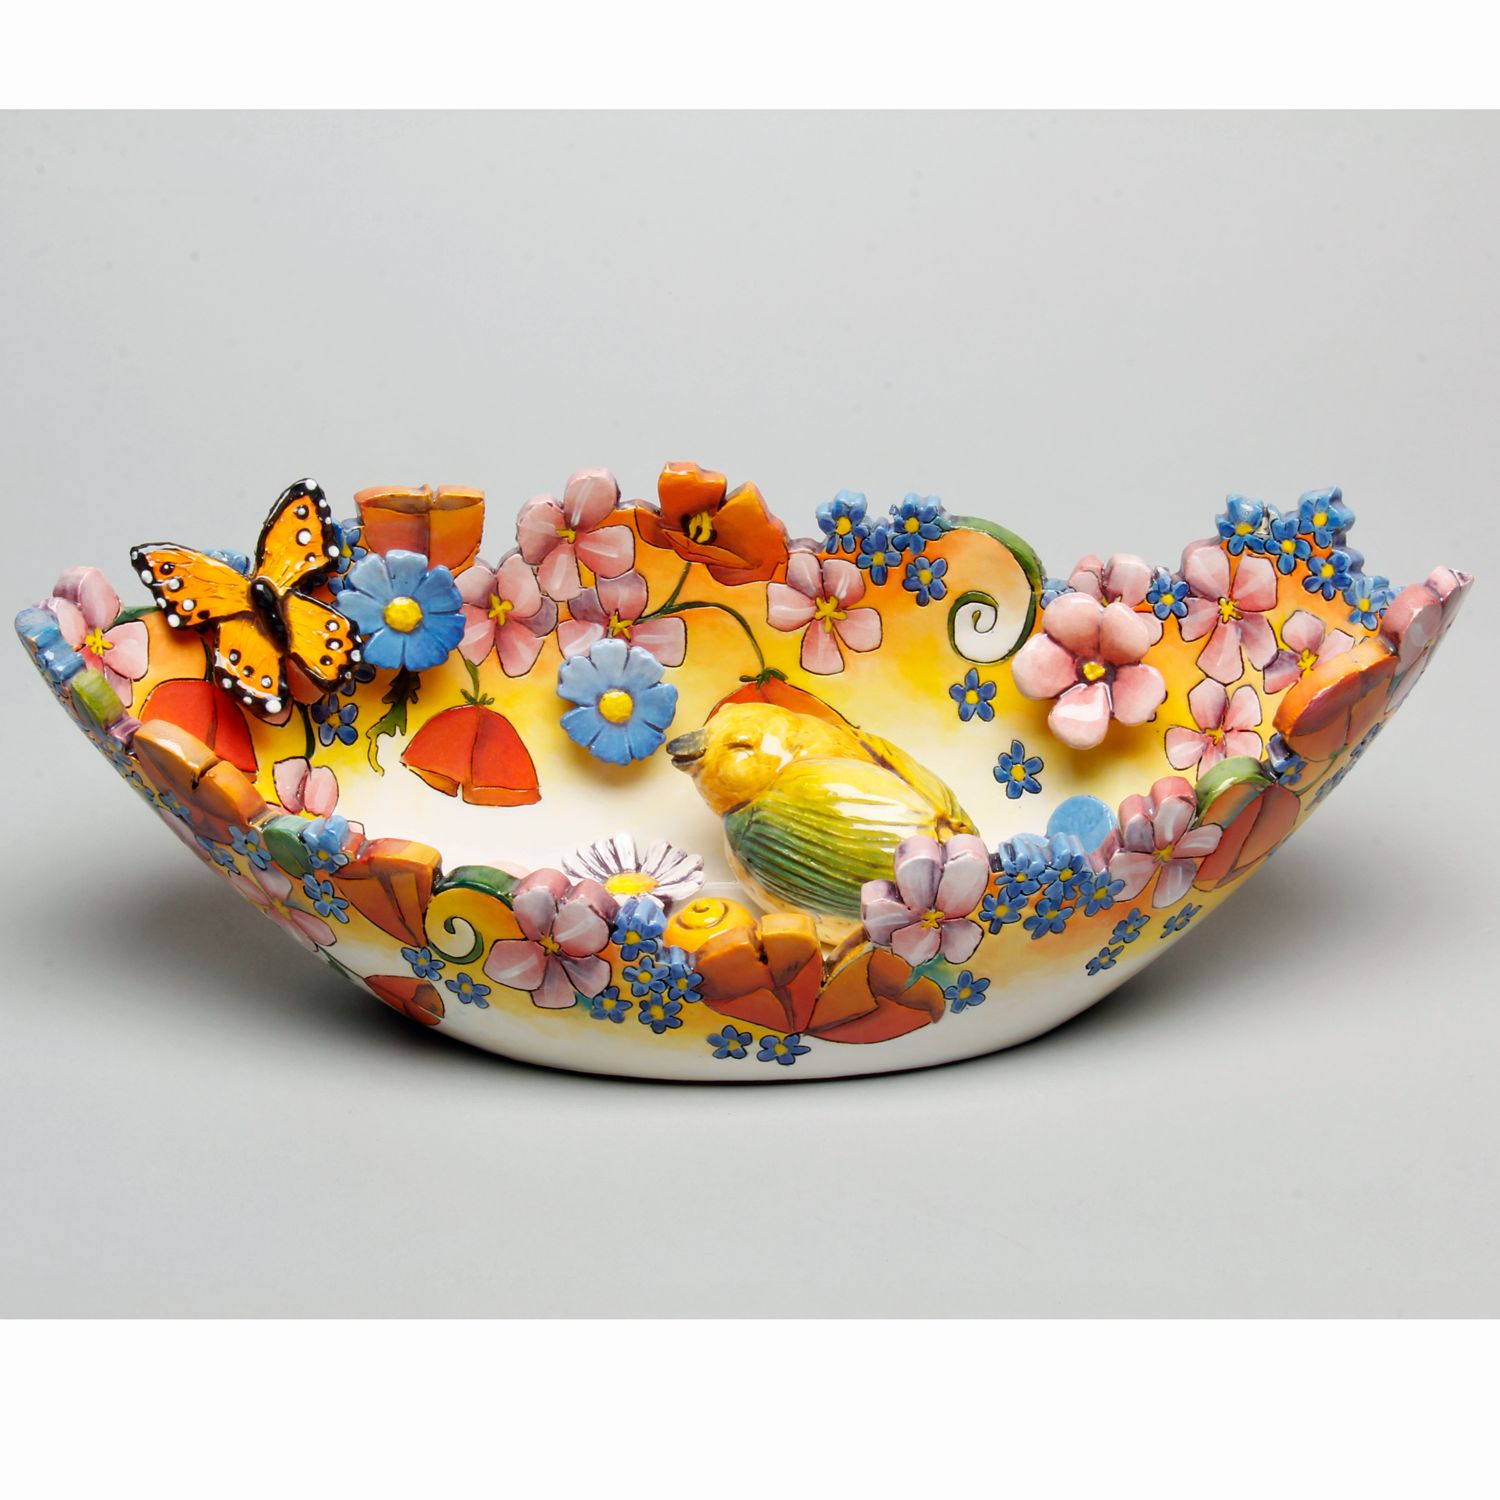 DaNisha Sculpture: Oval Cutaway Floral Bowl Product Image 1 of 2